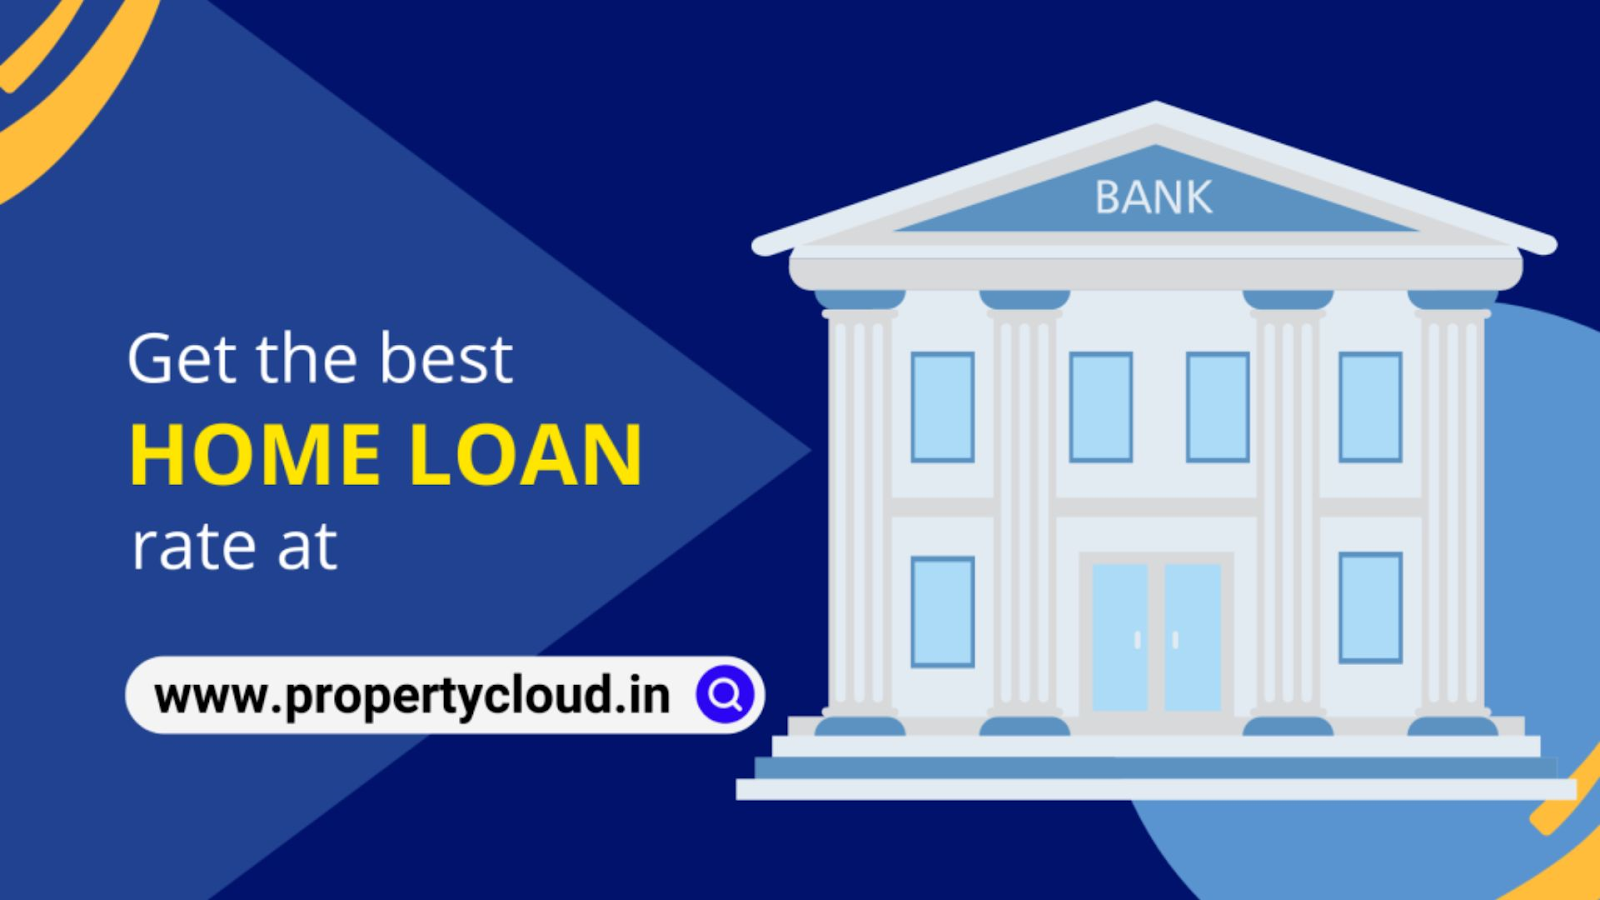 Visit PropertyCloud to get the lowest rates on home loans.